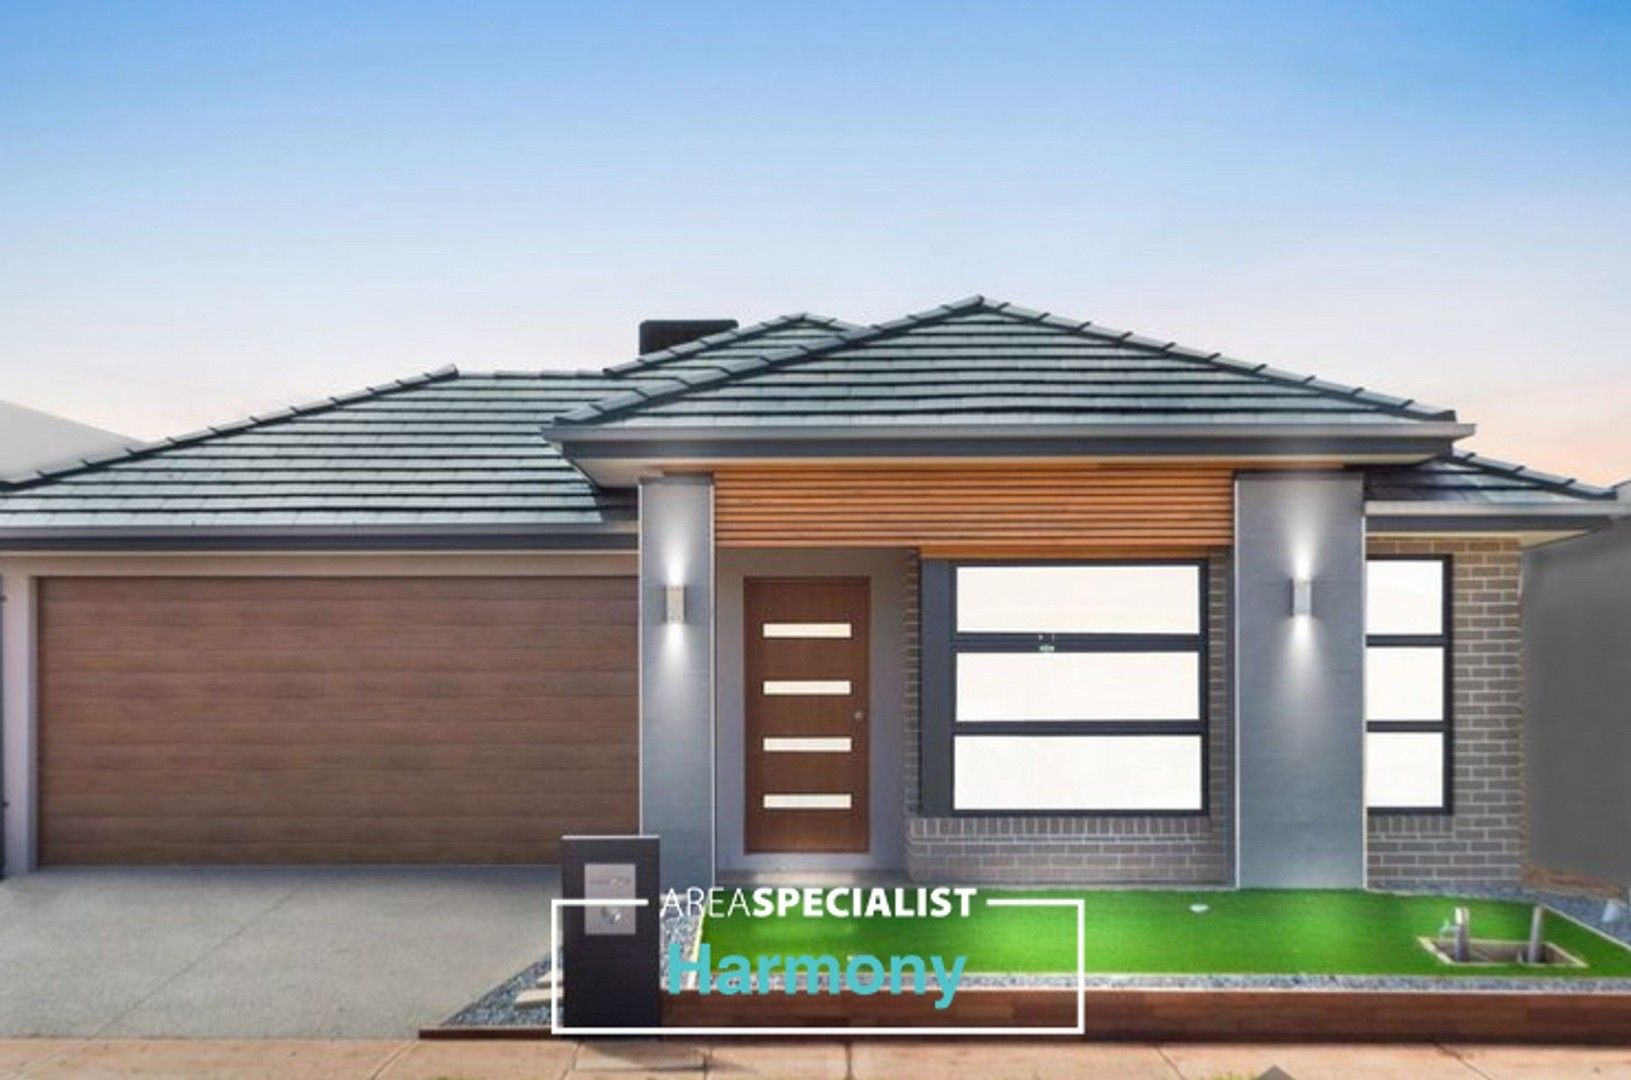 4 bedrooms House in 37 Stockport Crescent THORNHILL PARK VIC, 3335